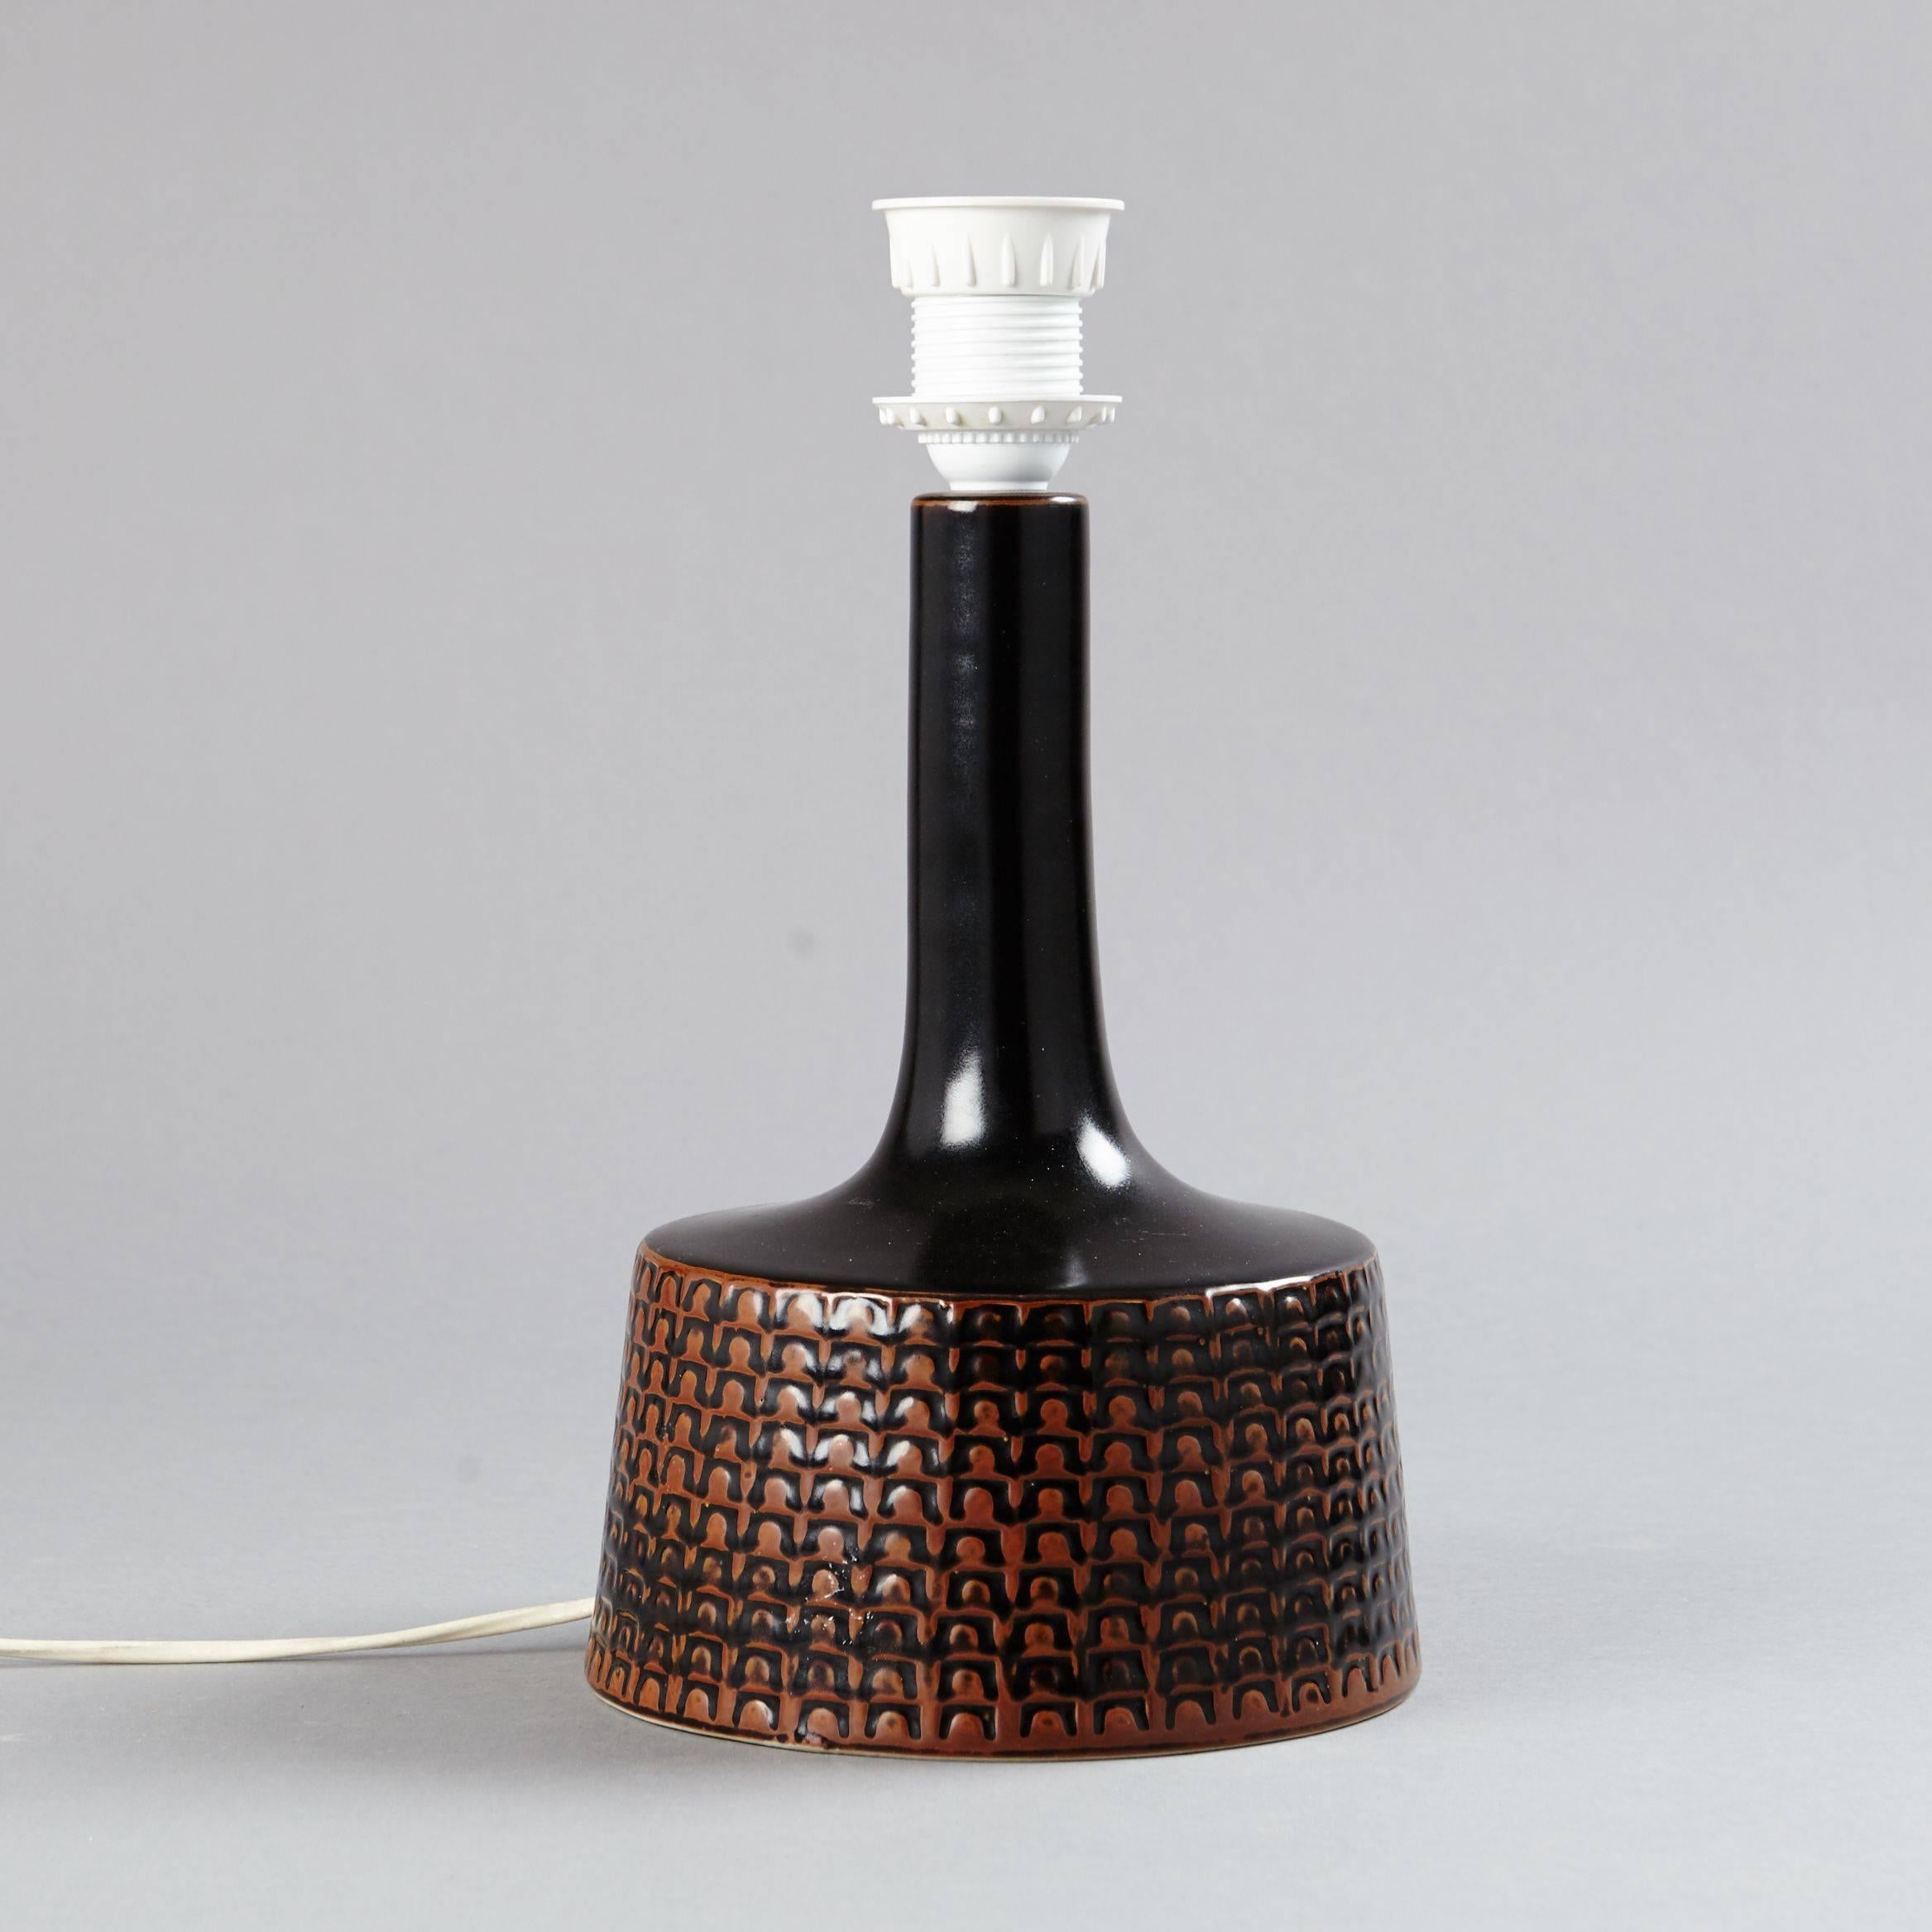 A handmade glazed dark brown and ochre red ceramic lamp by Stig Lindberg with an applied pattern relief. Signed 